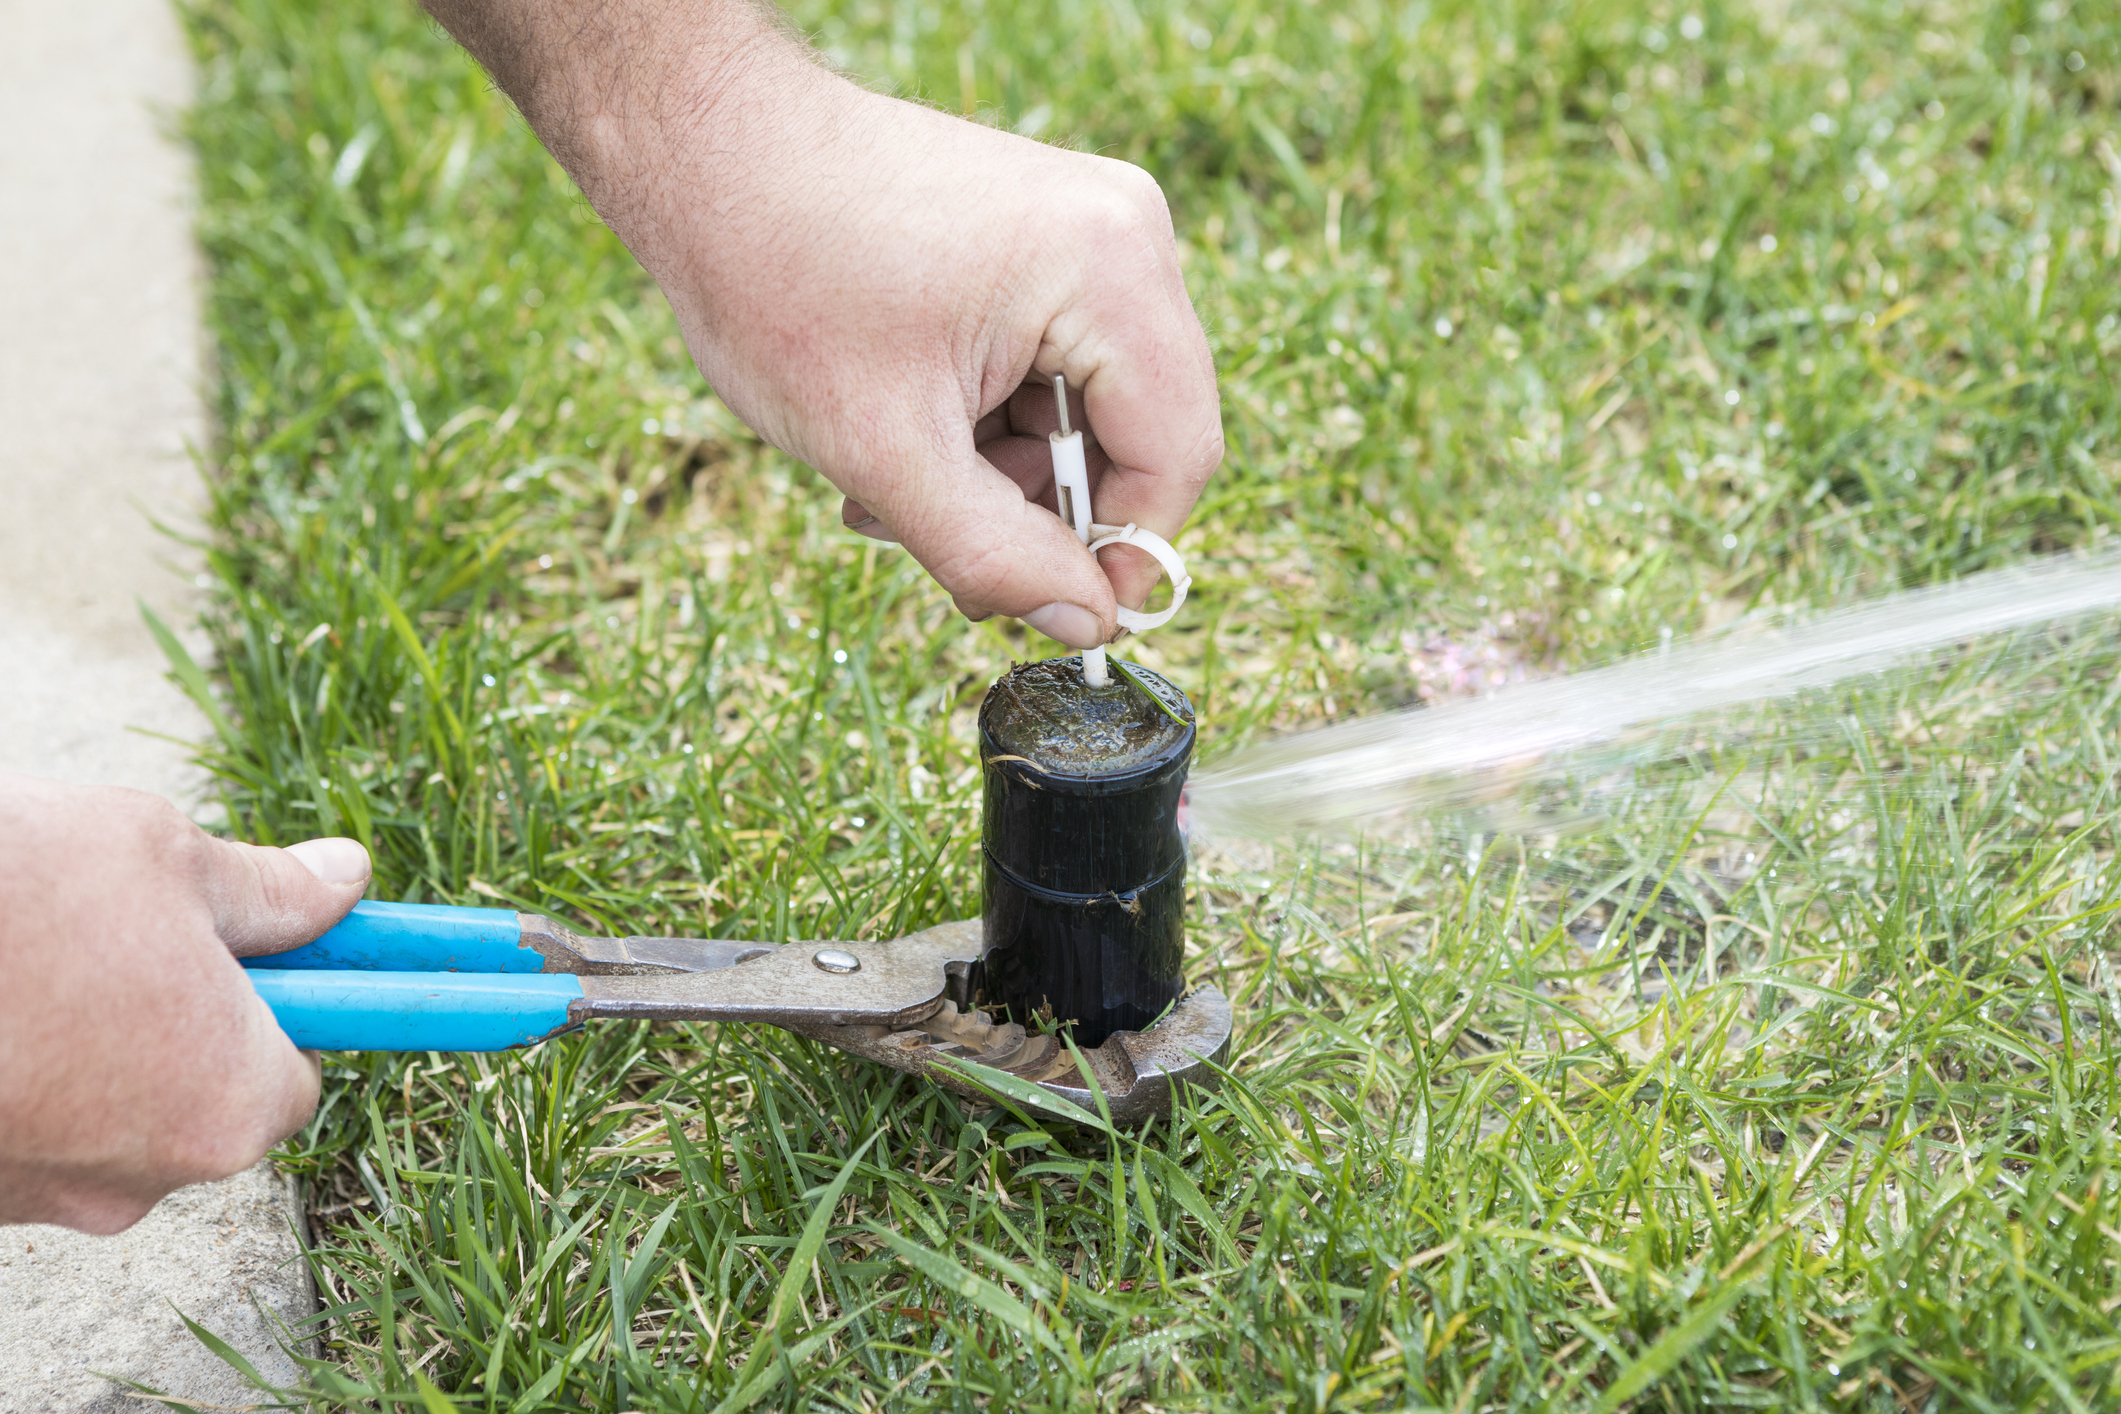 How To Replace A Solenoid For Sprinklers